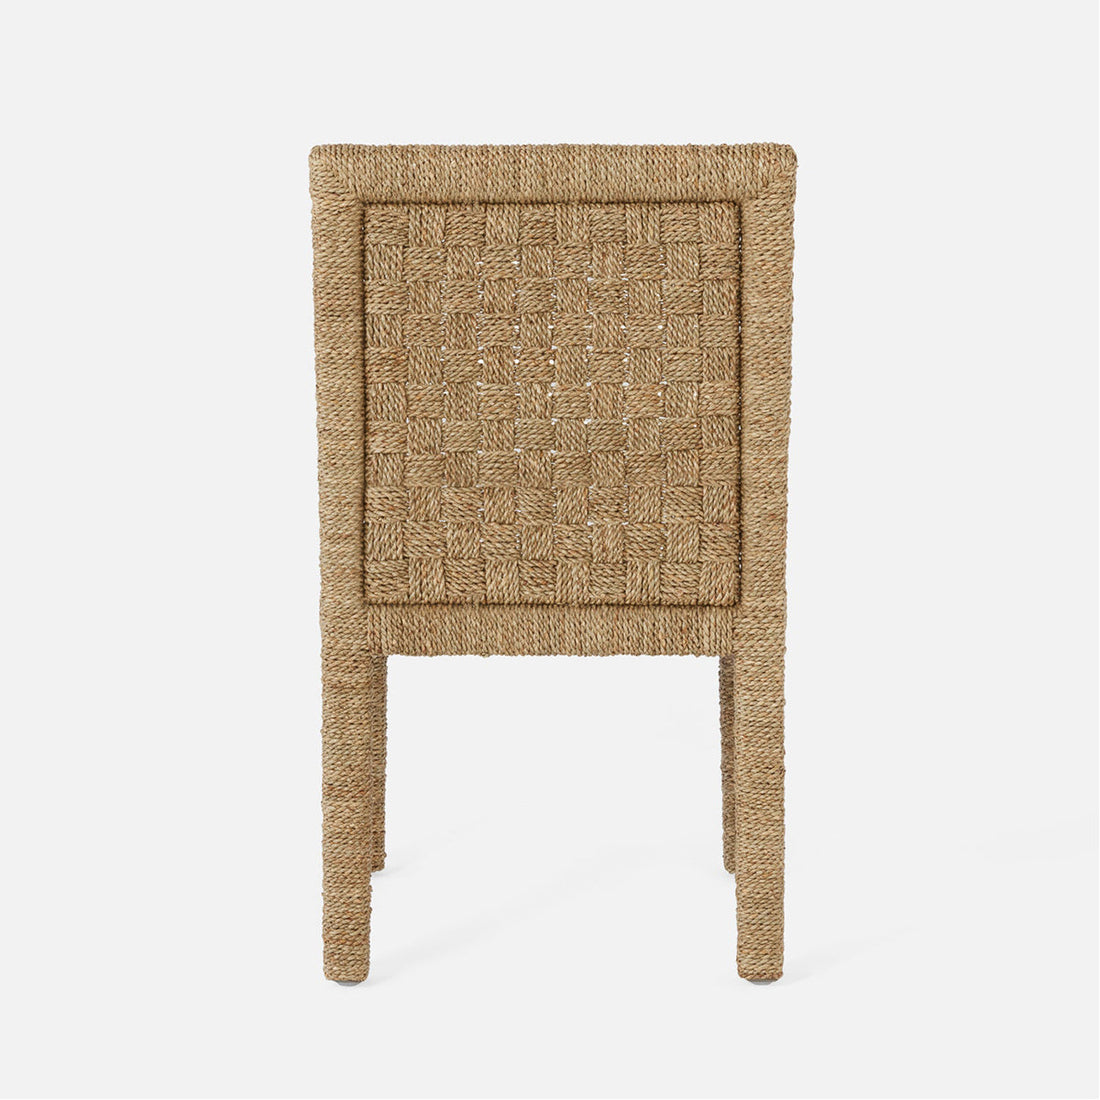 Made Goods Hayes Dining Chair in Mondego Cotton Jute